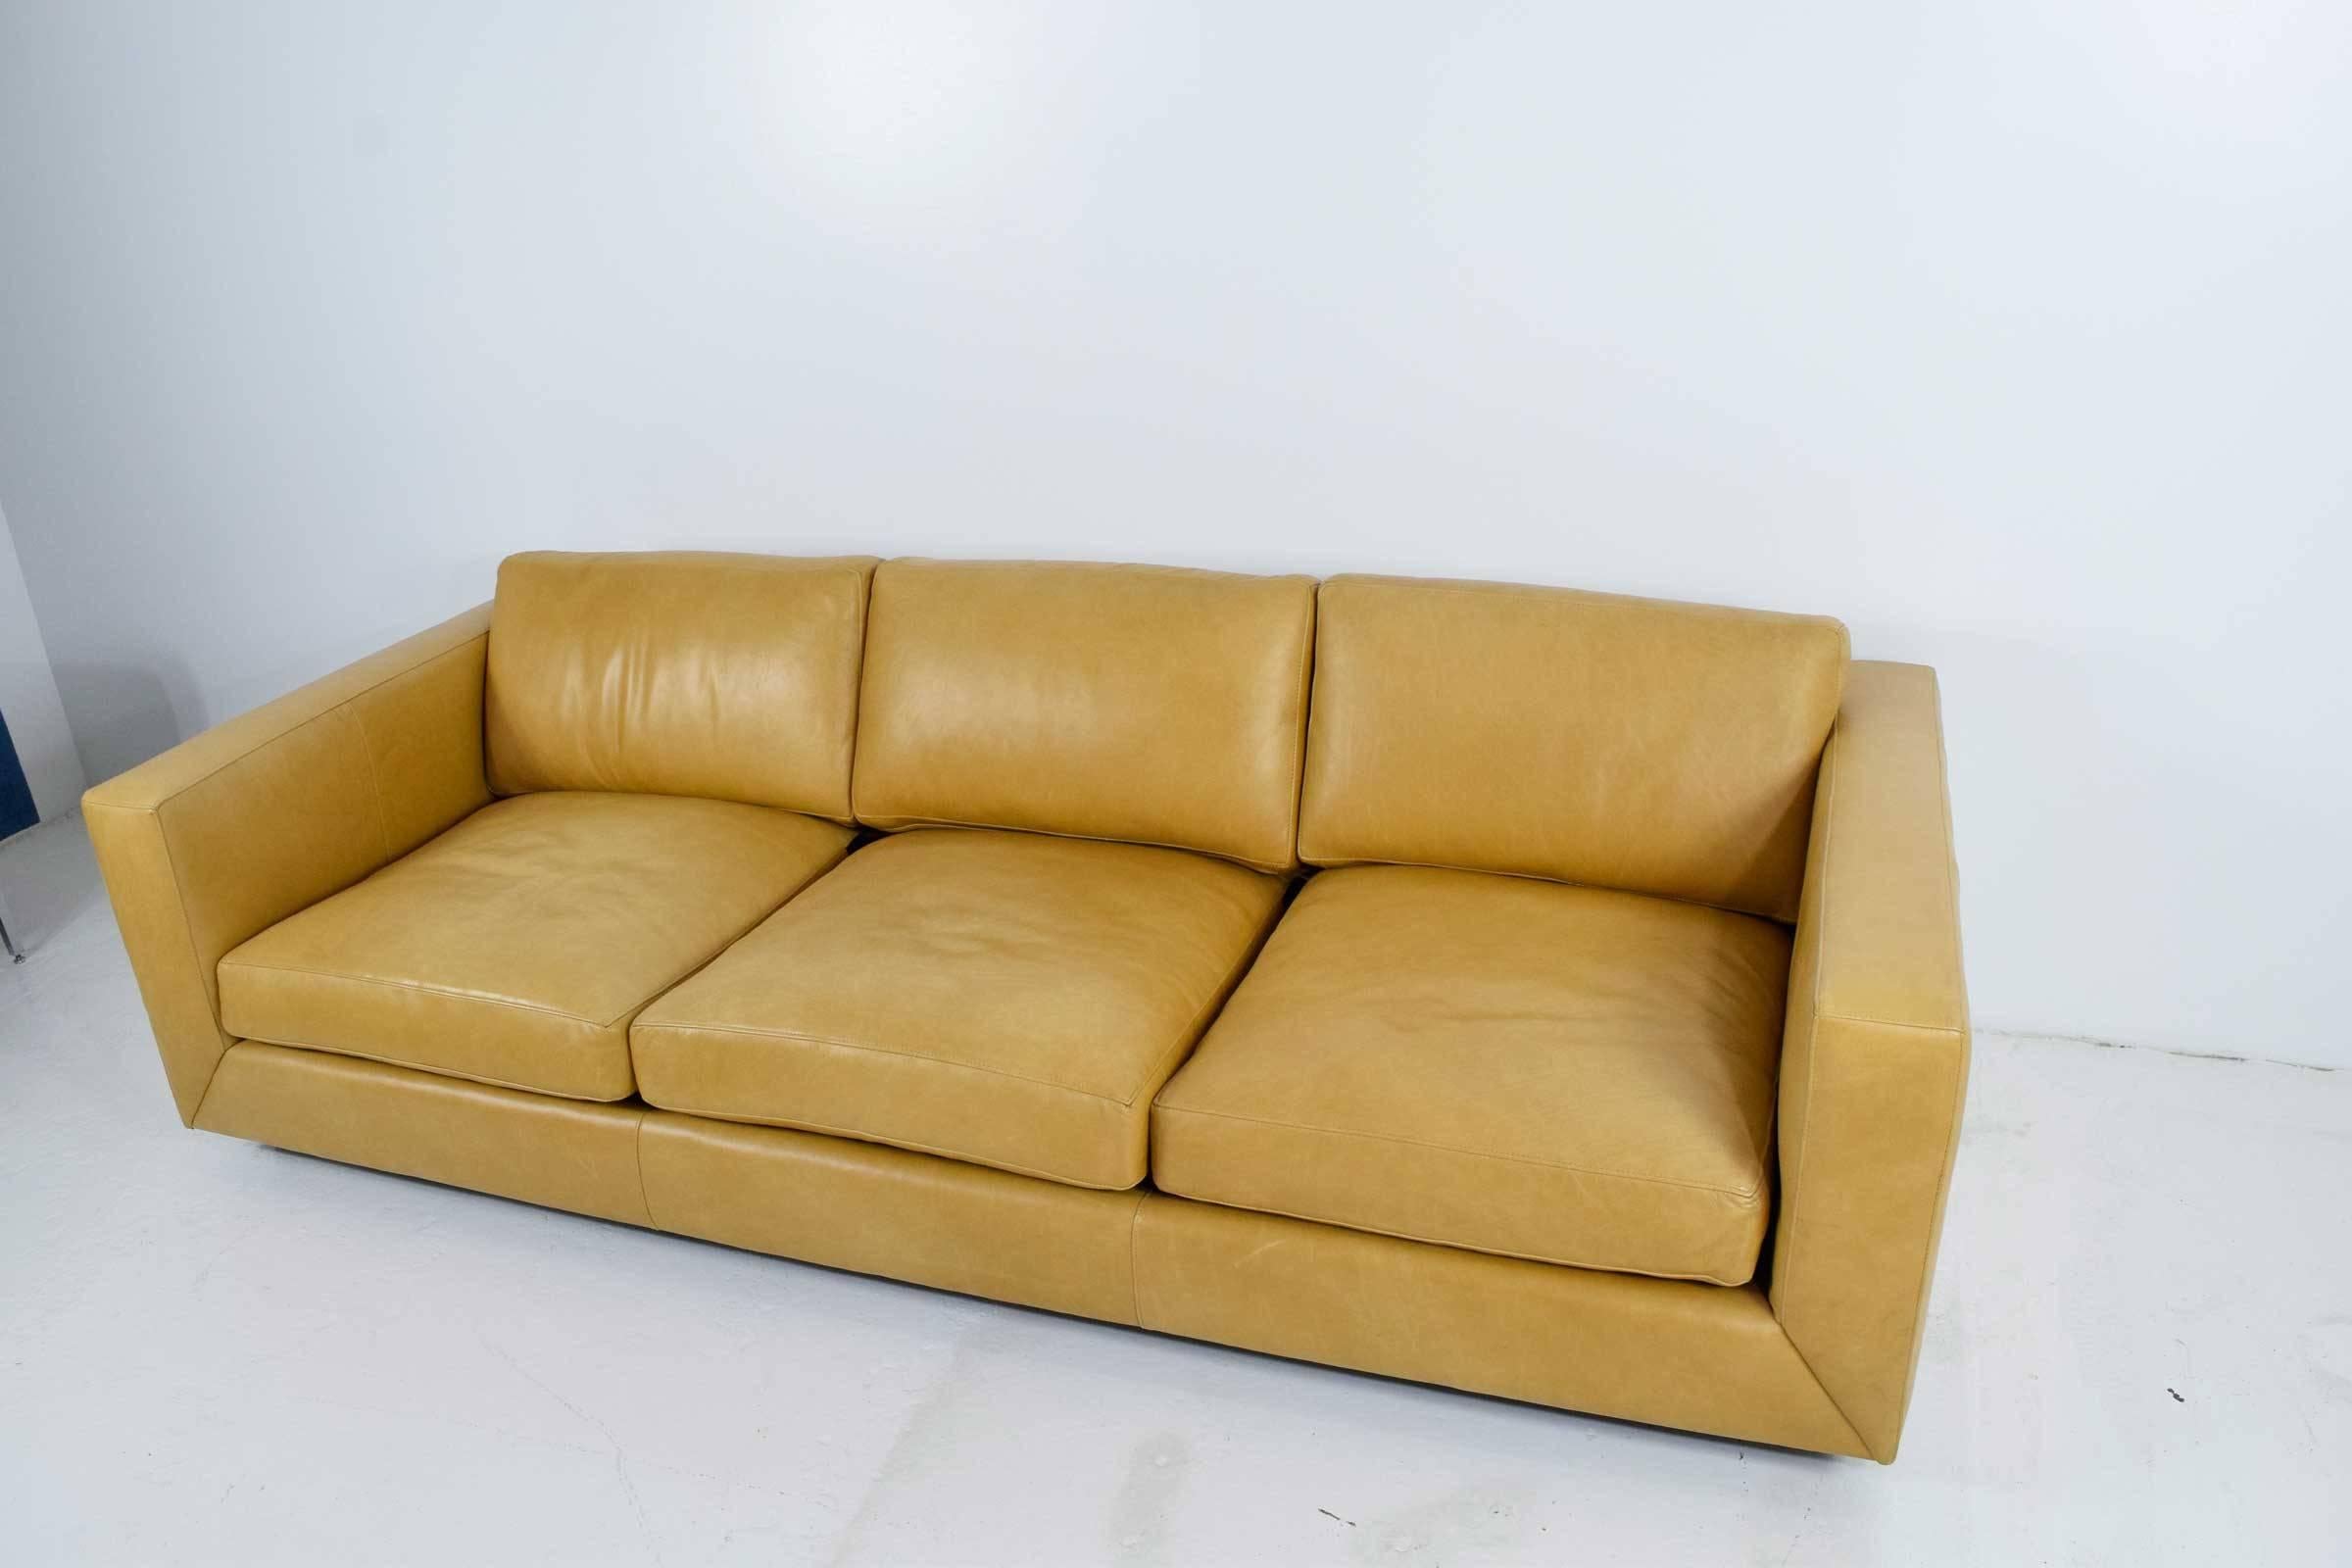 In great condition, three-seat leather sofa by Jonathan Adler.